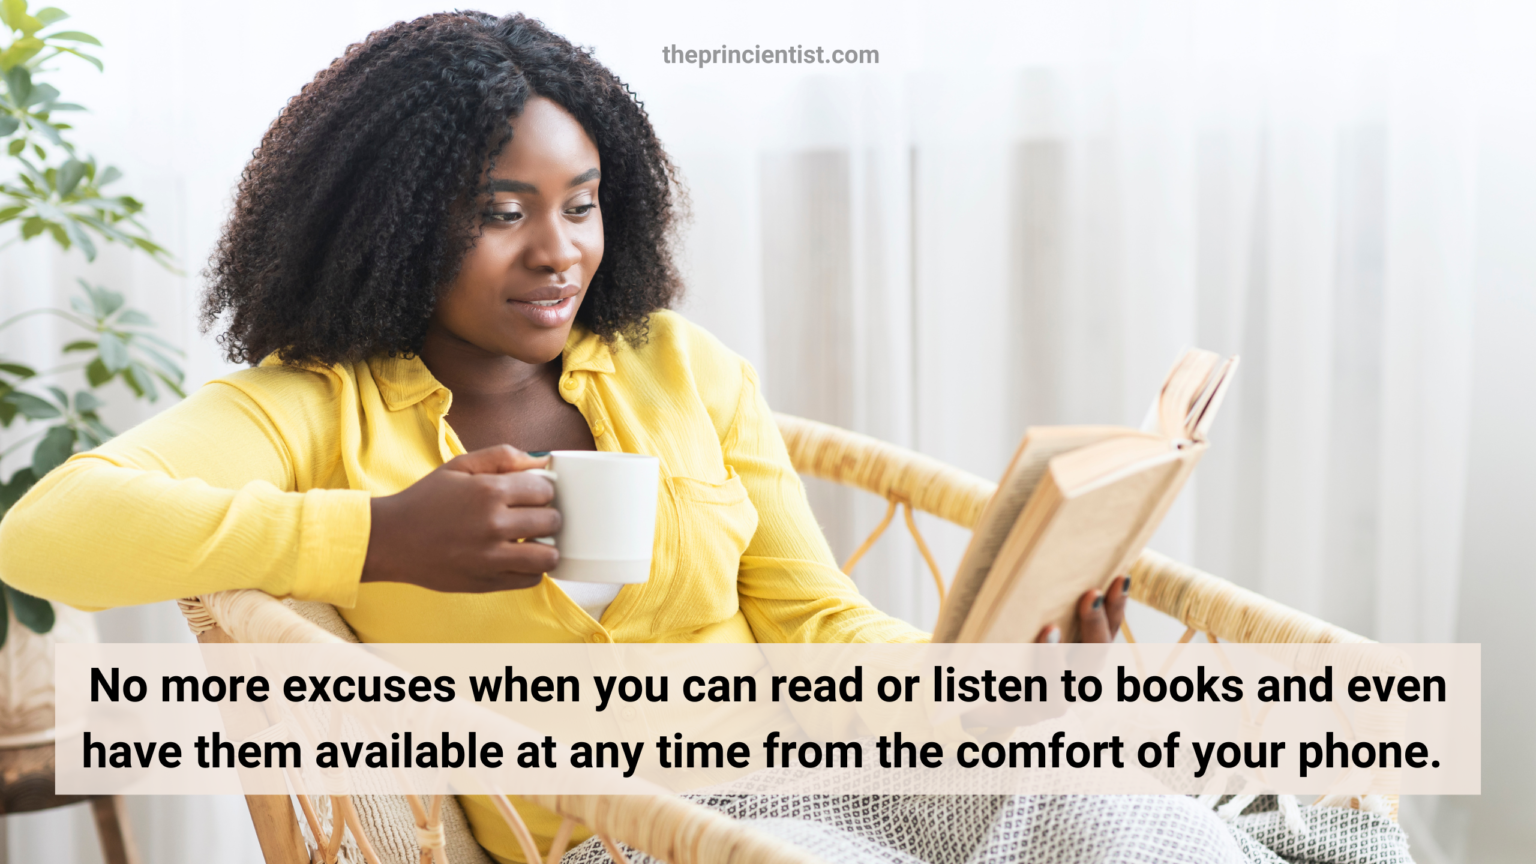 black woman sitting in the couch reading a book in enjoyment and holding a teacup of which I hope is wine